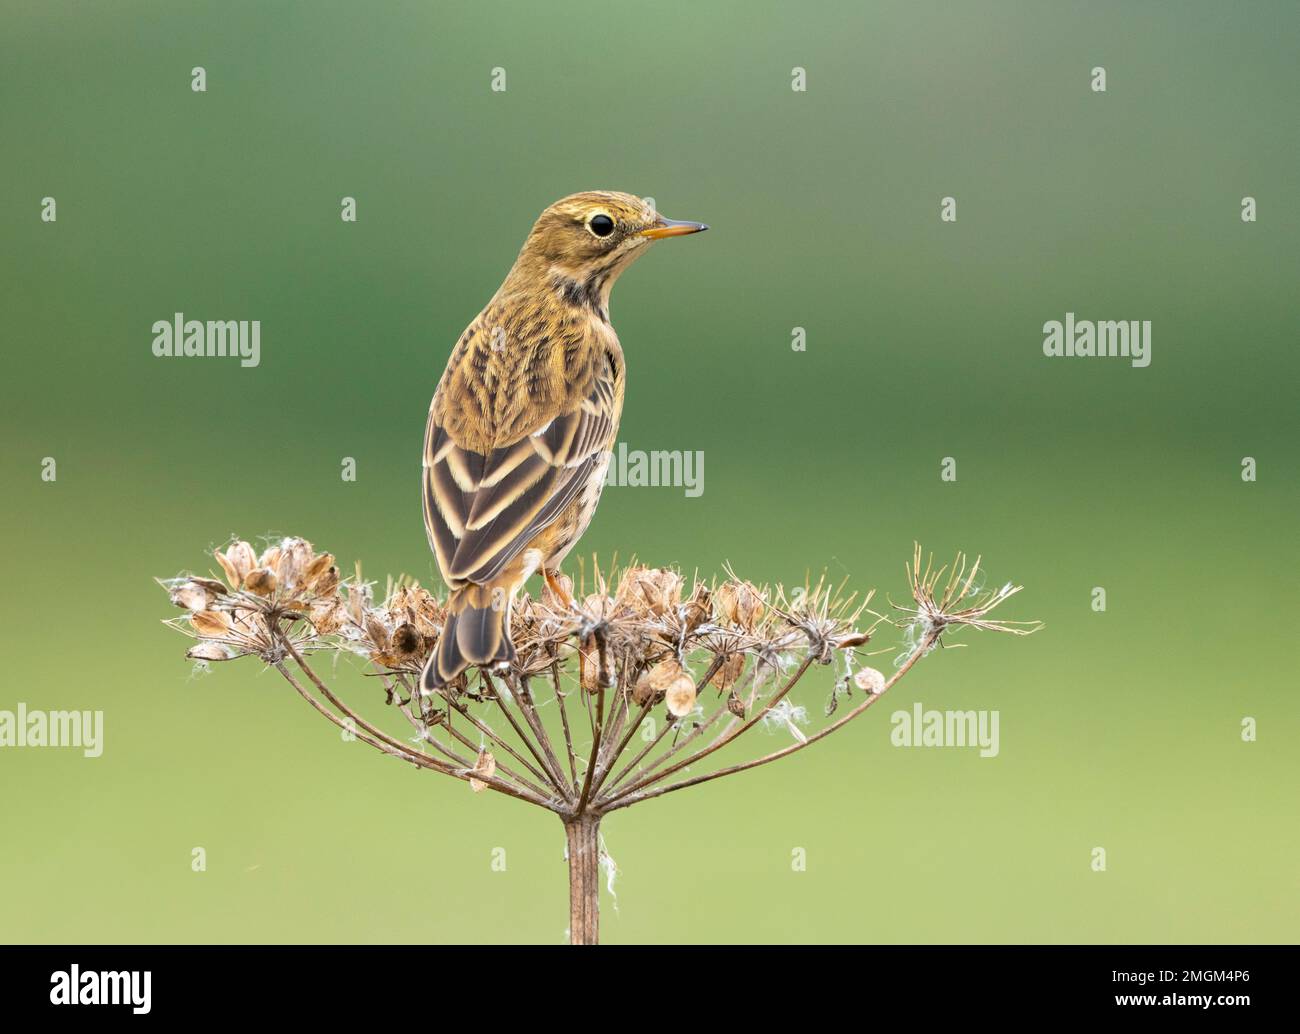 Meadow pipit (Anthus pratensis) perched on a dry flower, England Stock Photo